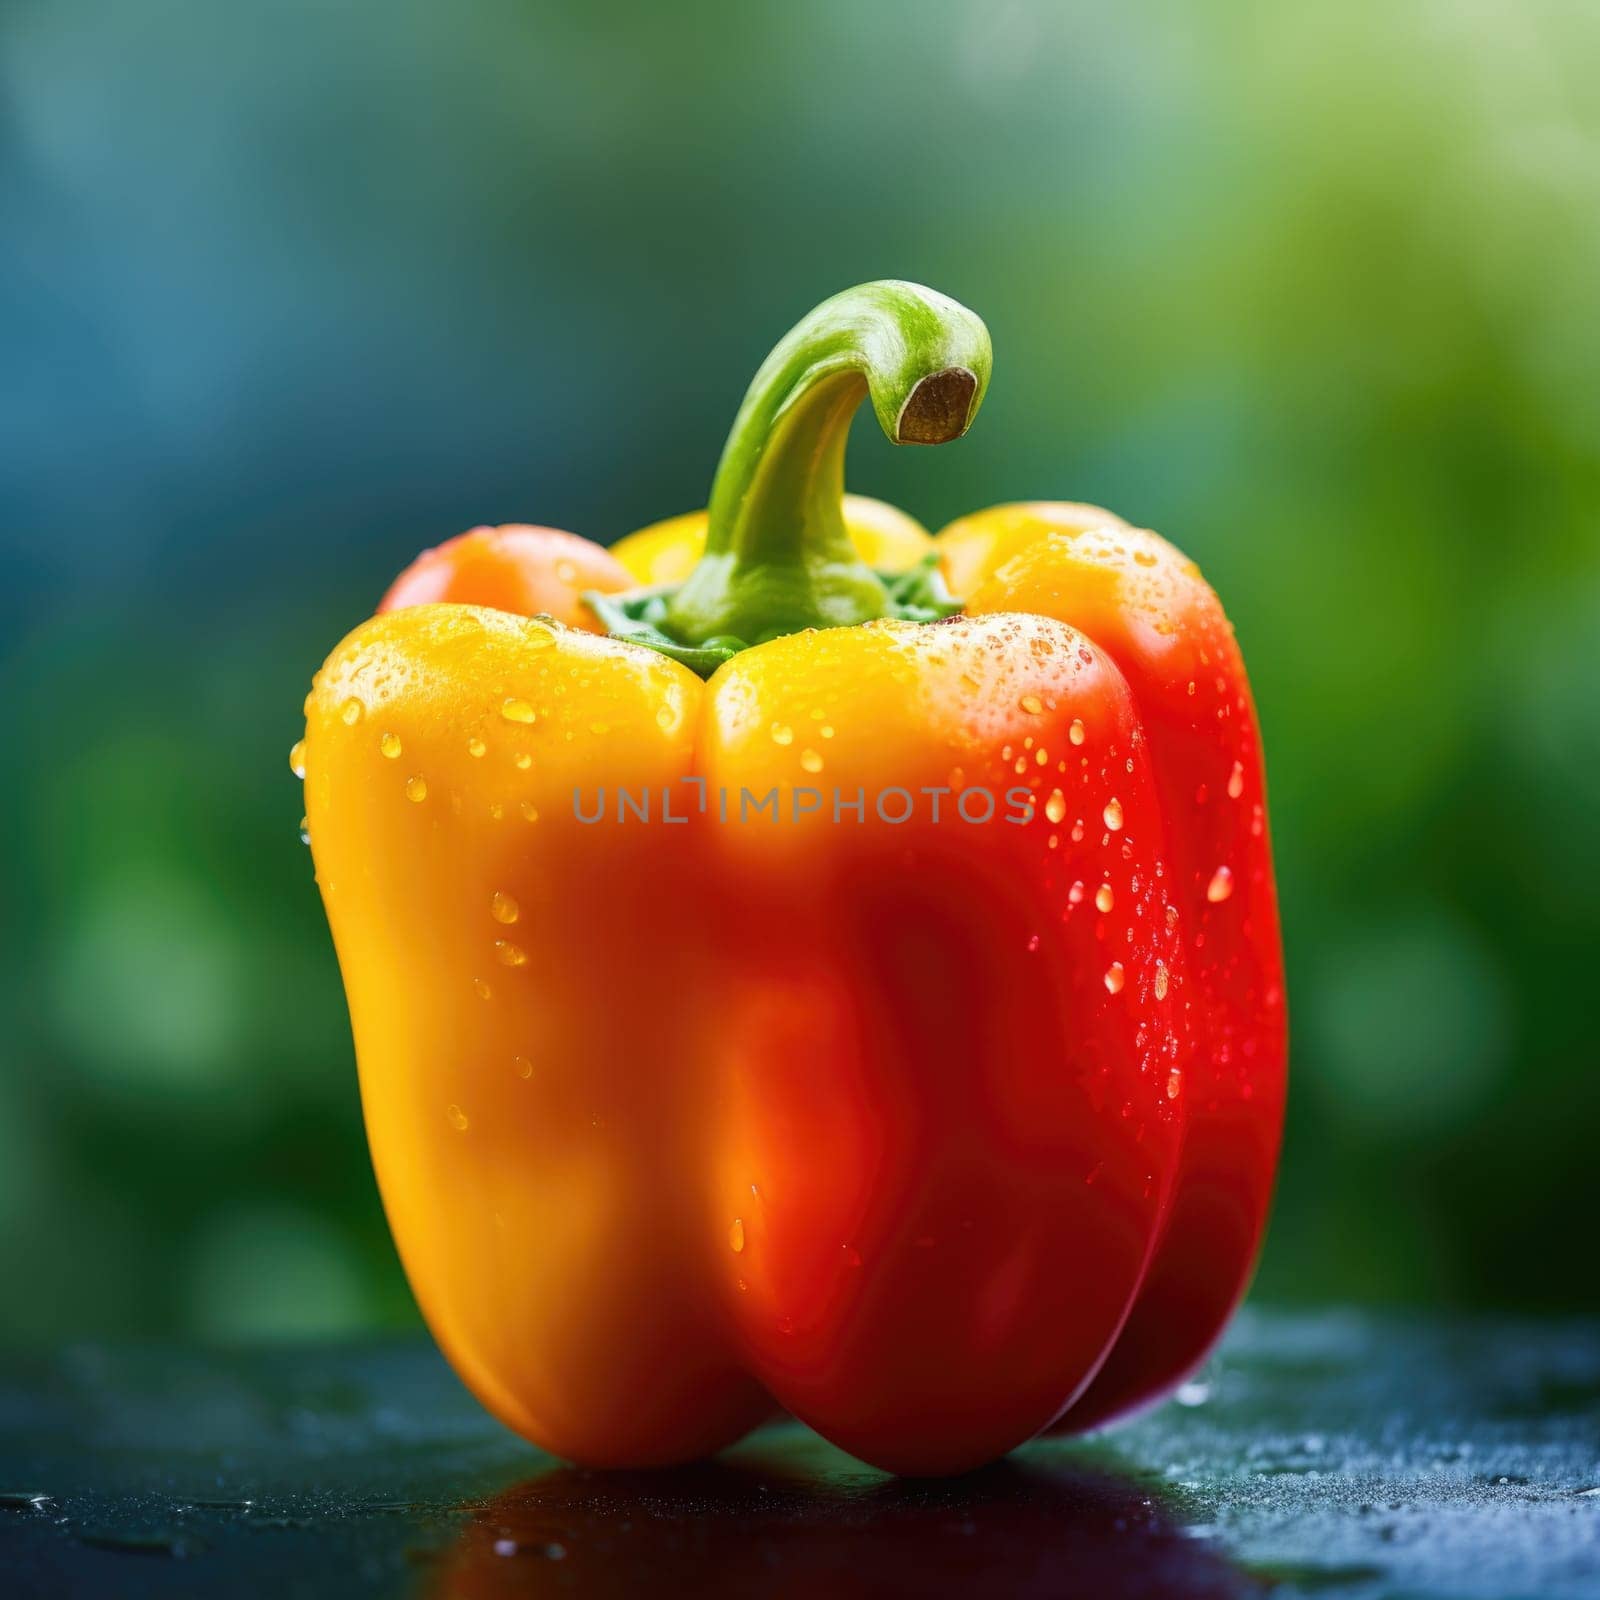 A red and yellow bell pepper sitting on a table